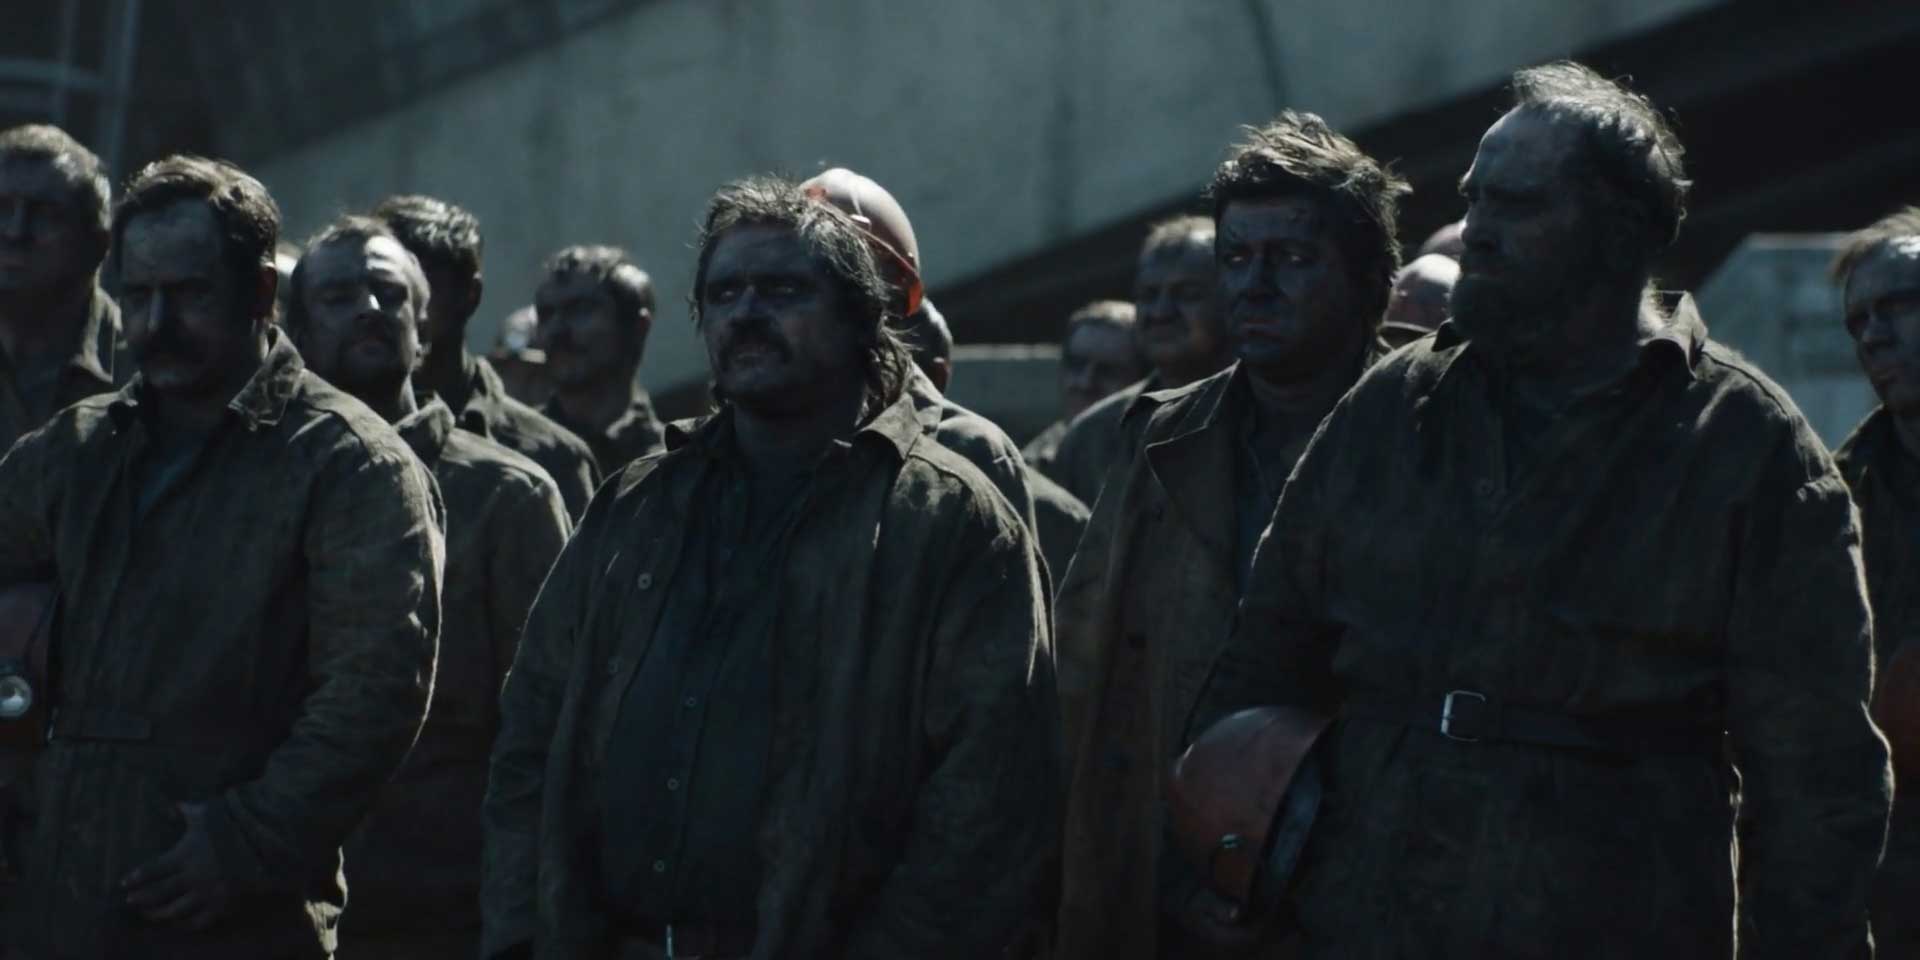 HBO Chernobyl Episode 3 S1E3 Miners